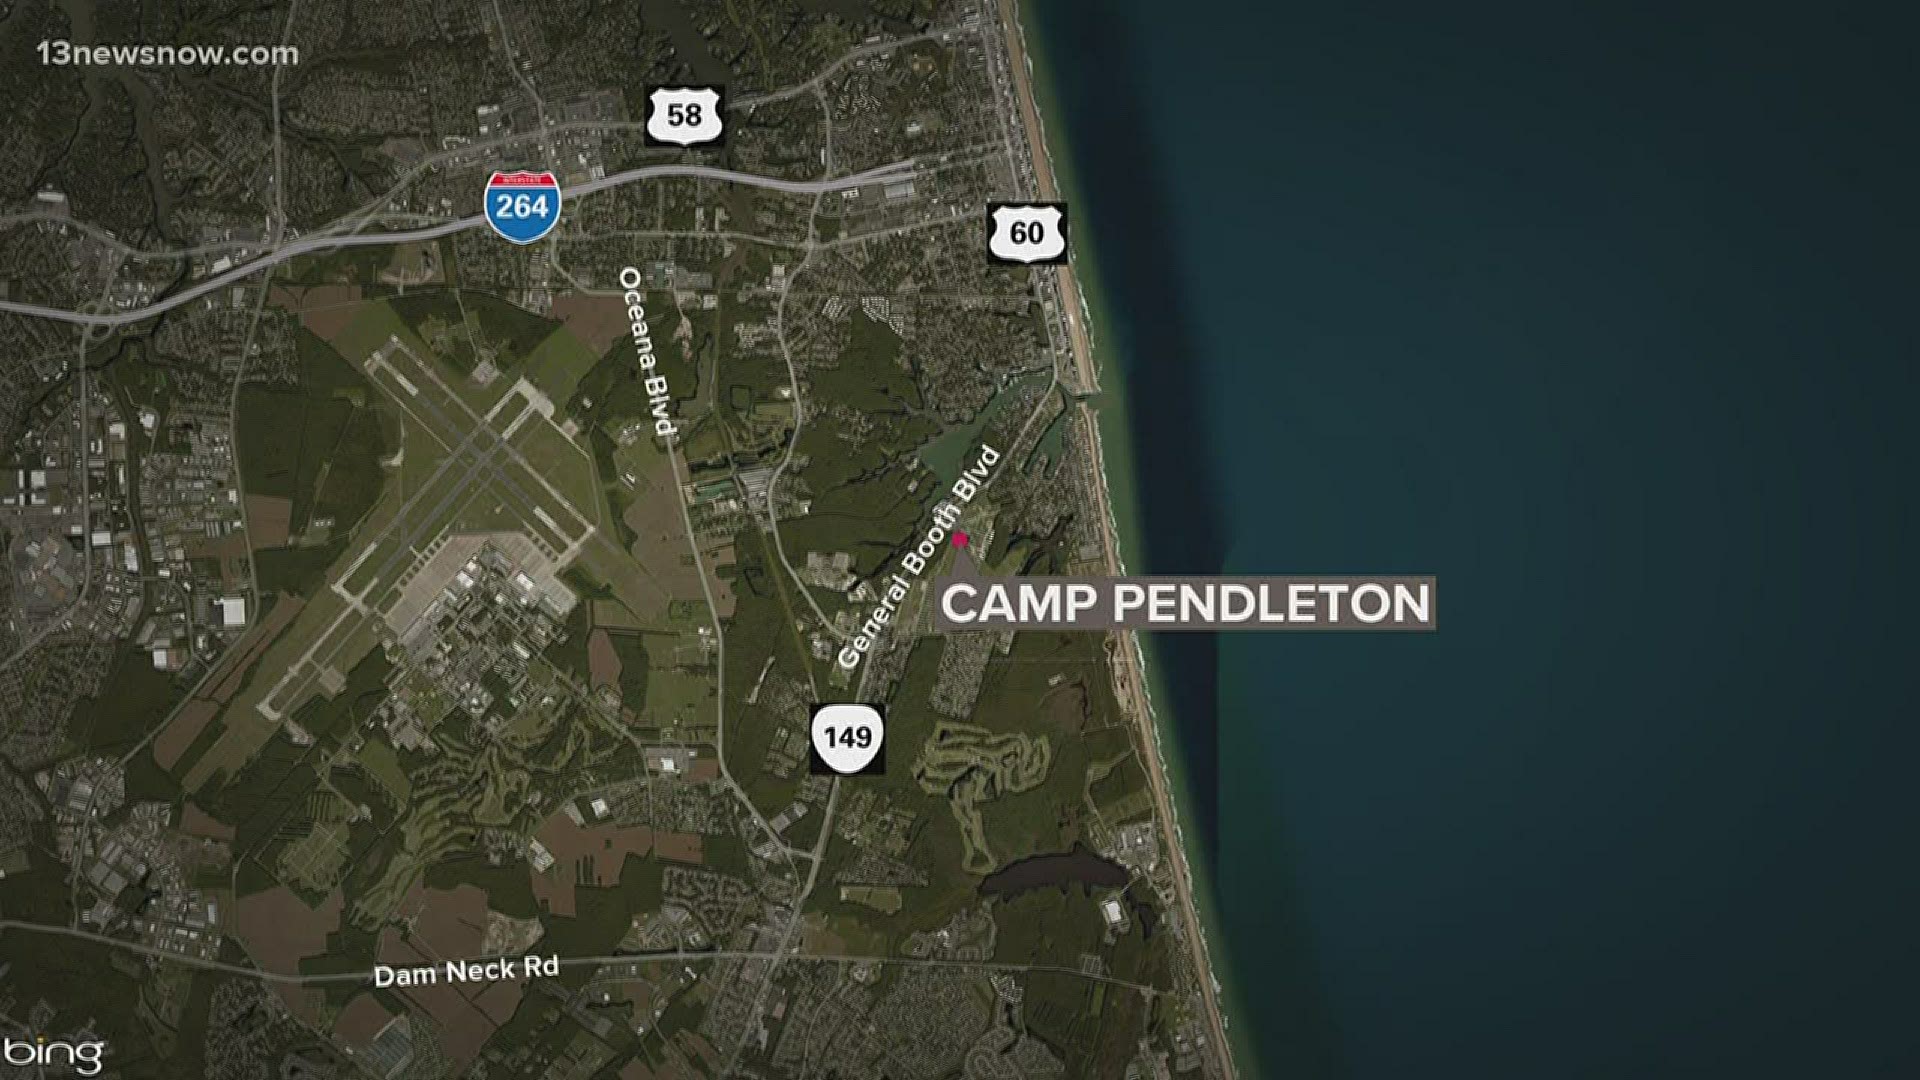 Hearing loud booms in Virginia Beach?  It's reportedly old ordnance being disposed of at Camp Pendleton.